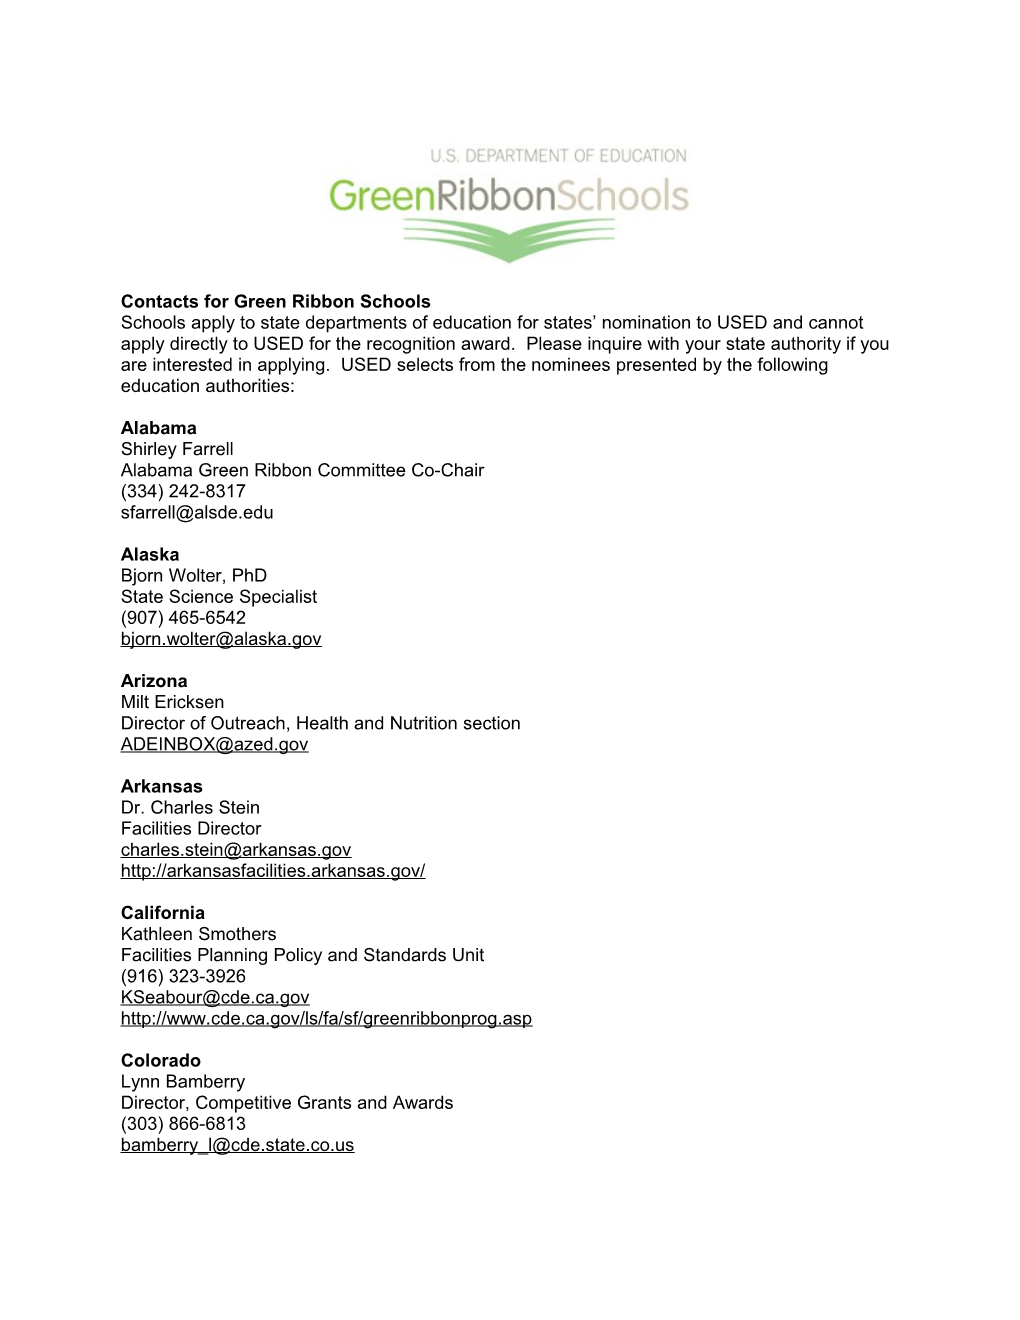 States Contacts for Green Ribbon Schools (MS Word)